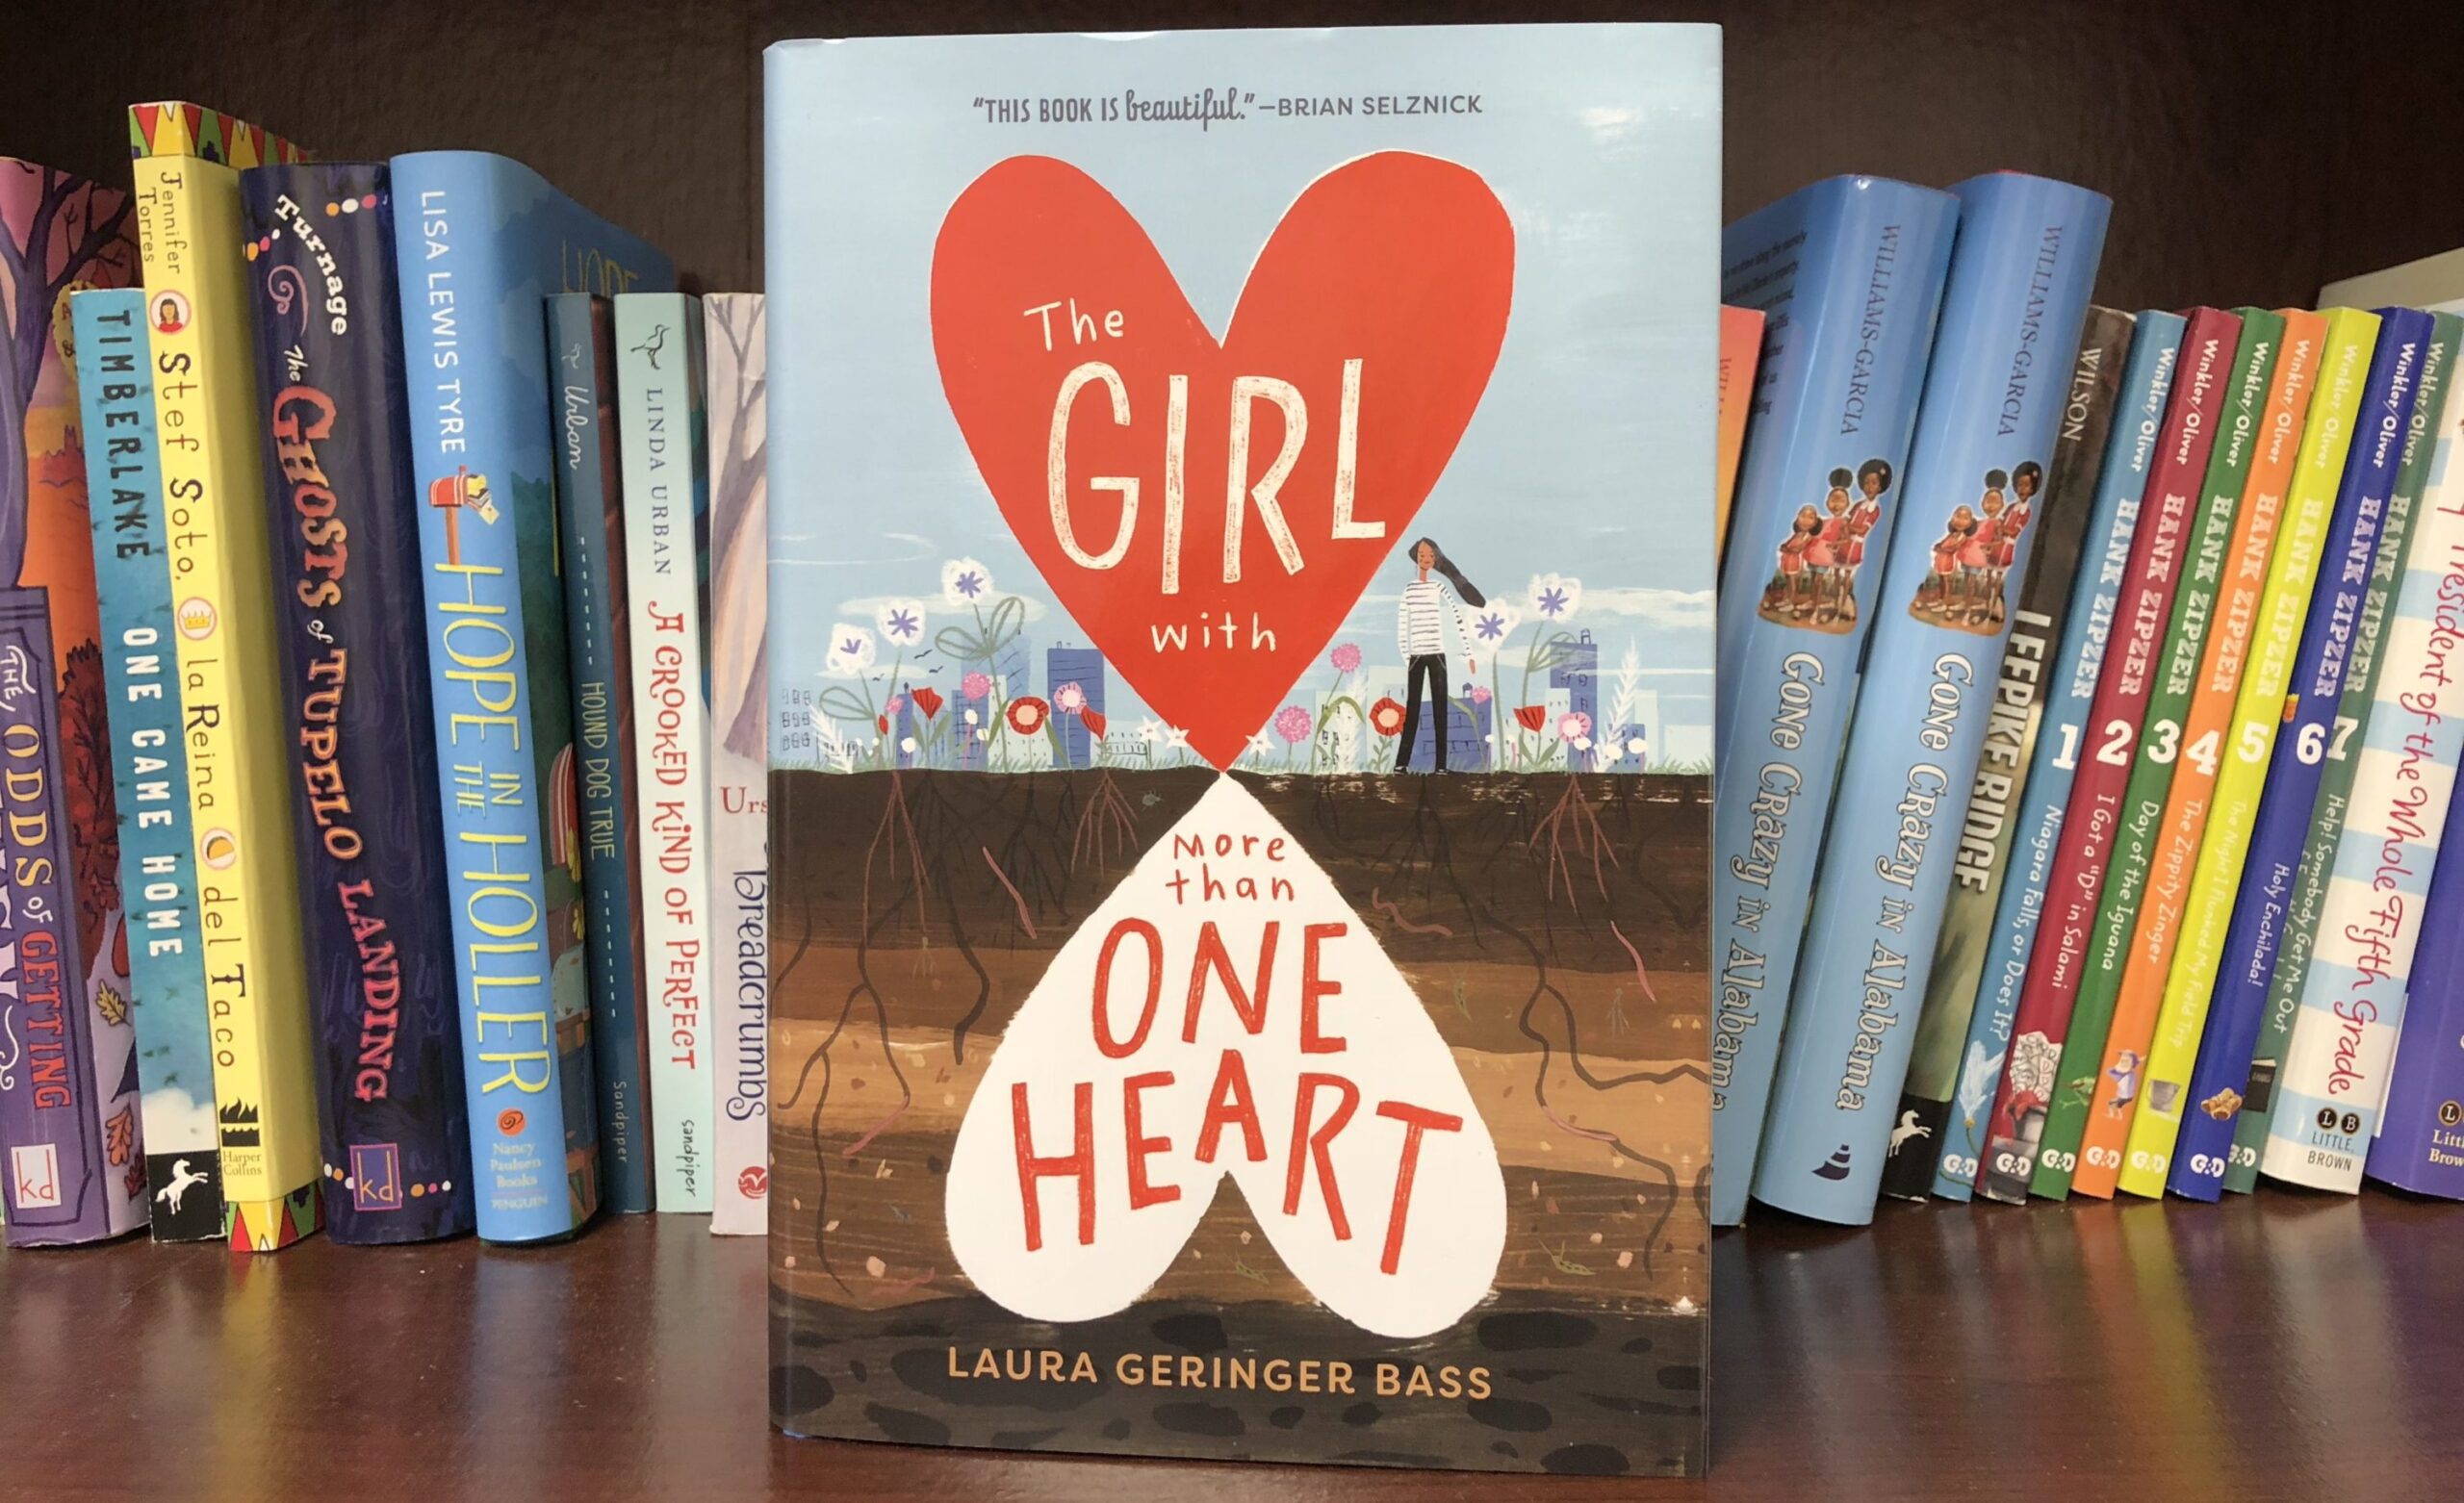 Laura Geringer Bass, The Girl With More Than One Heart (Abrams)